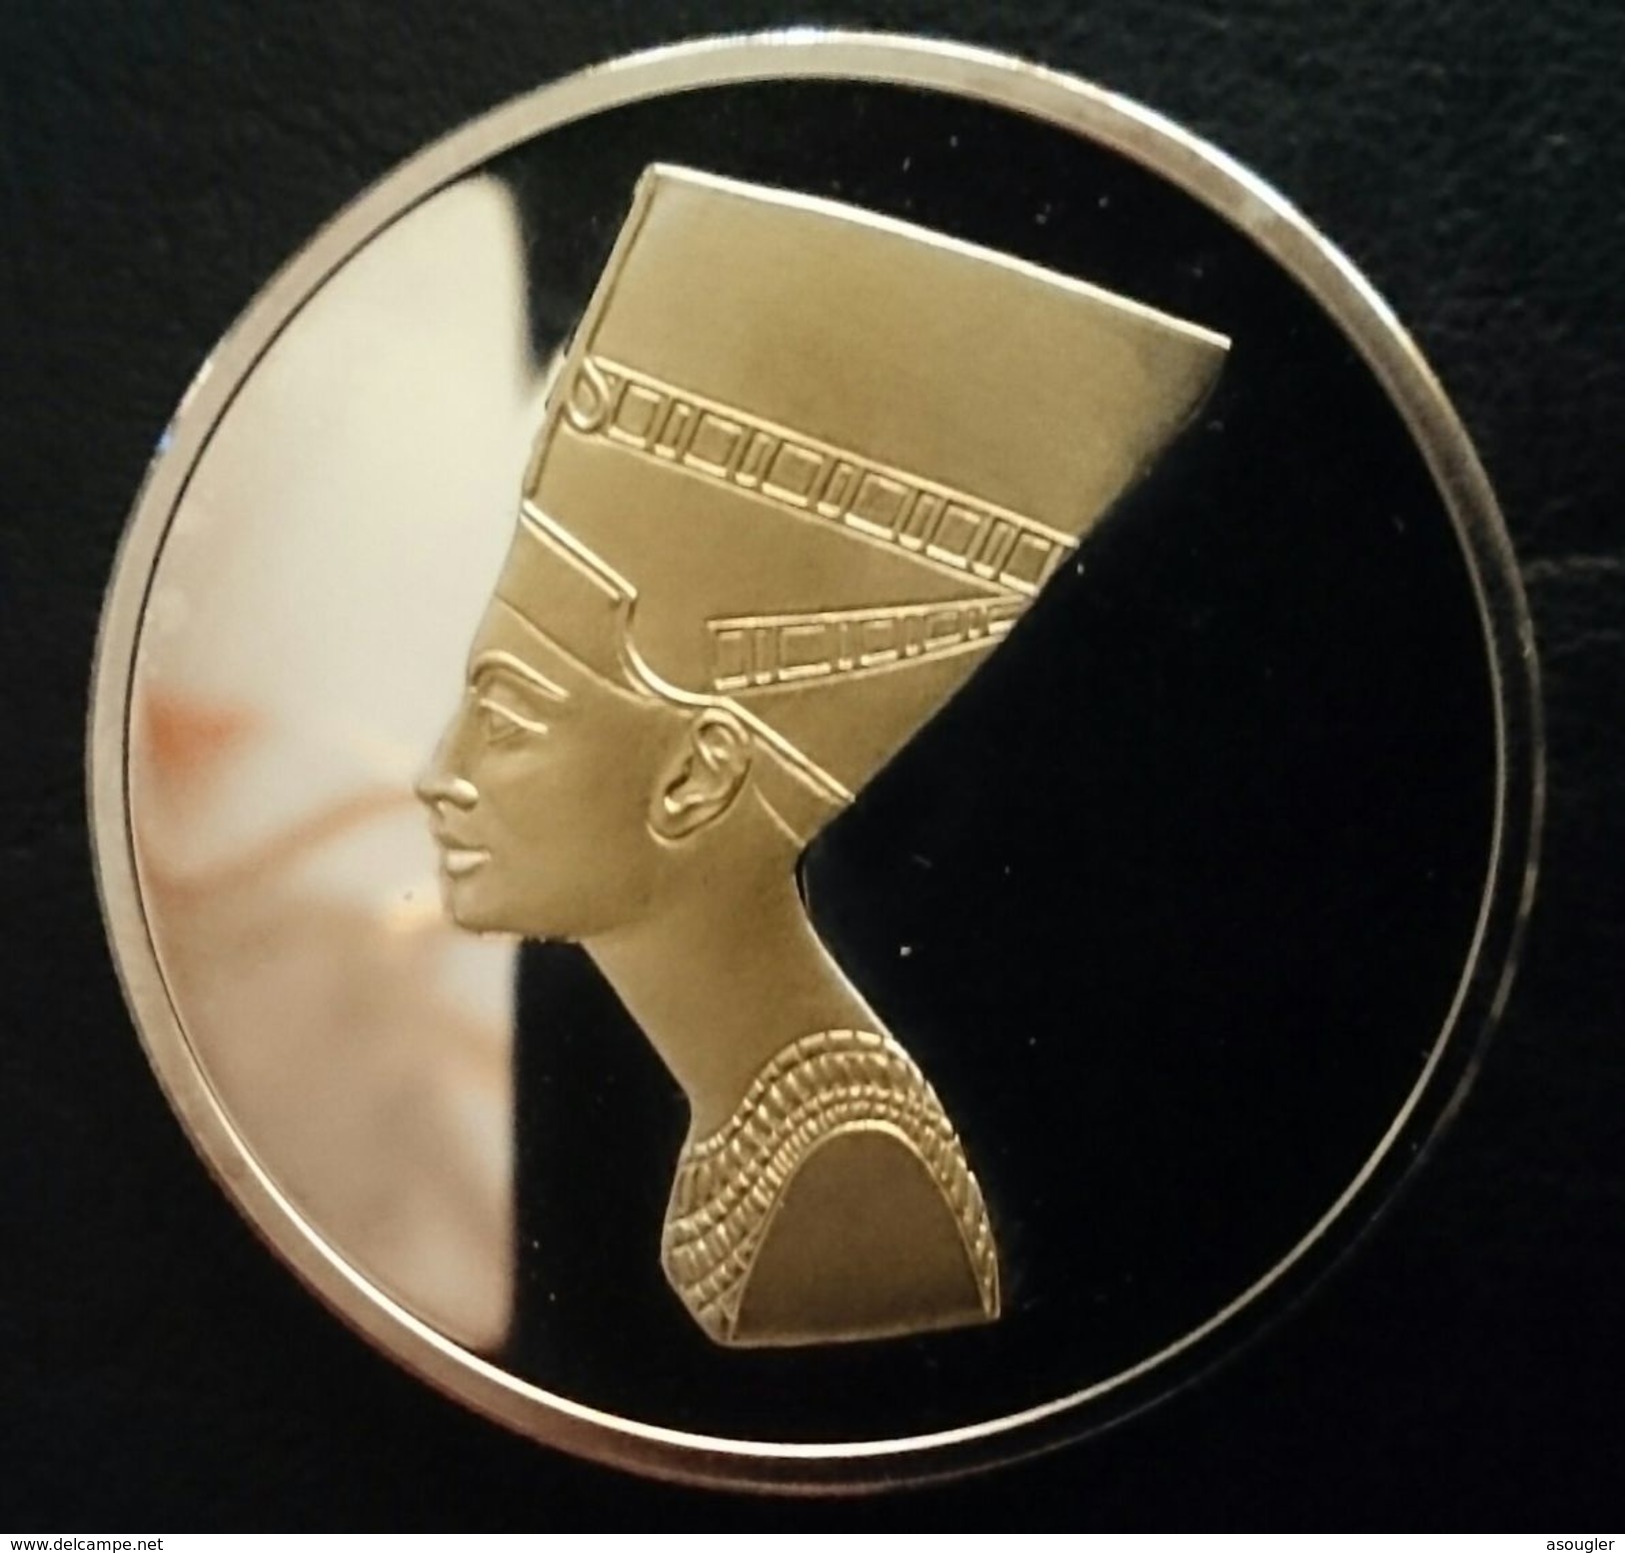 CAMBODIA 3000 Riels 2006 Silver & Gold PROOF "Queen Nefertiti" Free Shipping Via Registered Air Mail - Cambodge